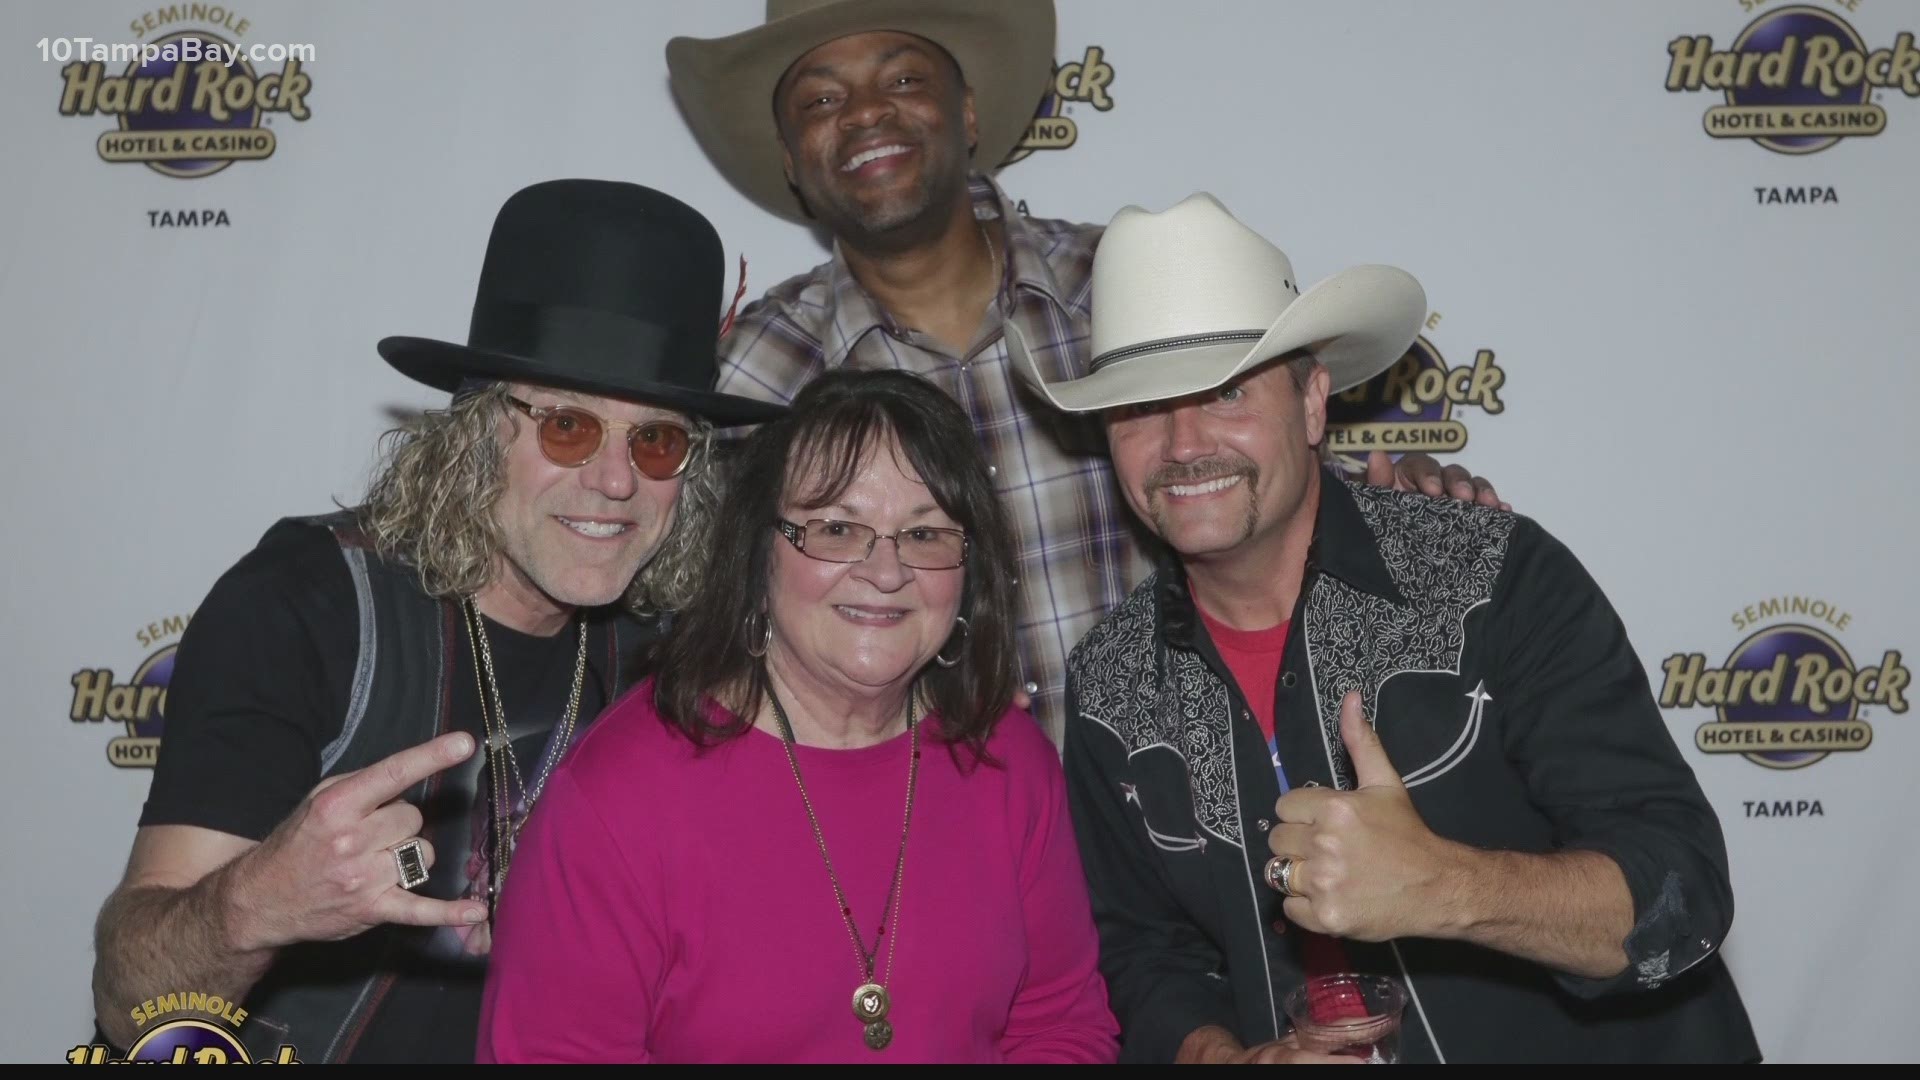 In 1974, Pattie Stepbach taught a child who grew up to become 'Big Kenny' from the band, Big & Rich. Their bond is helping feed hundreds of kids in Hernando County.